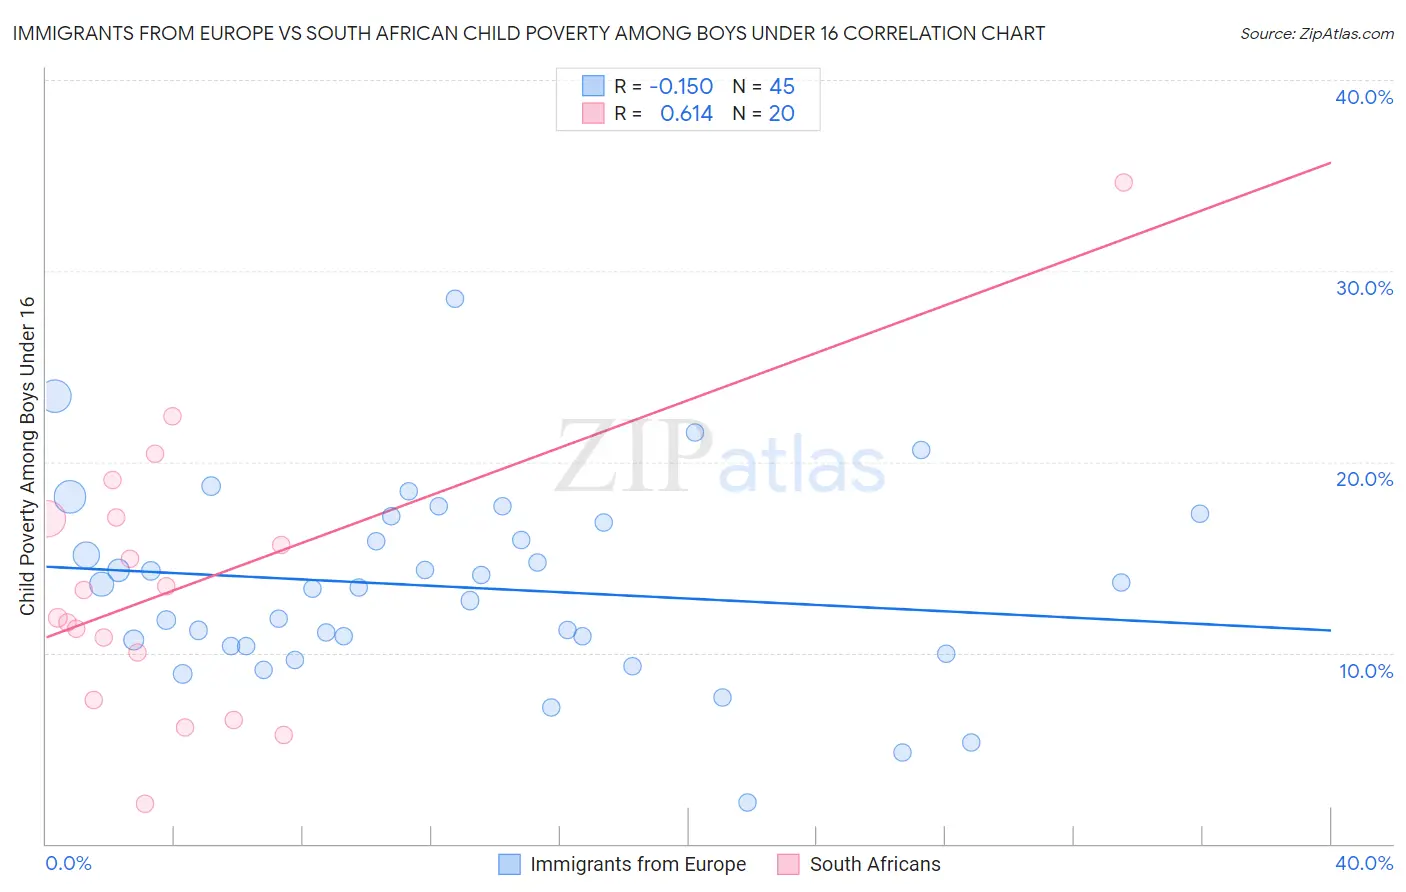 Immigrants from Europe vs South African Child Poverty Among Boys Under 16